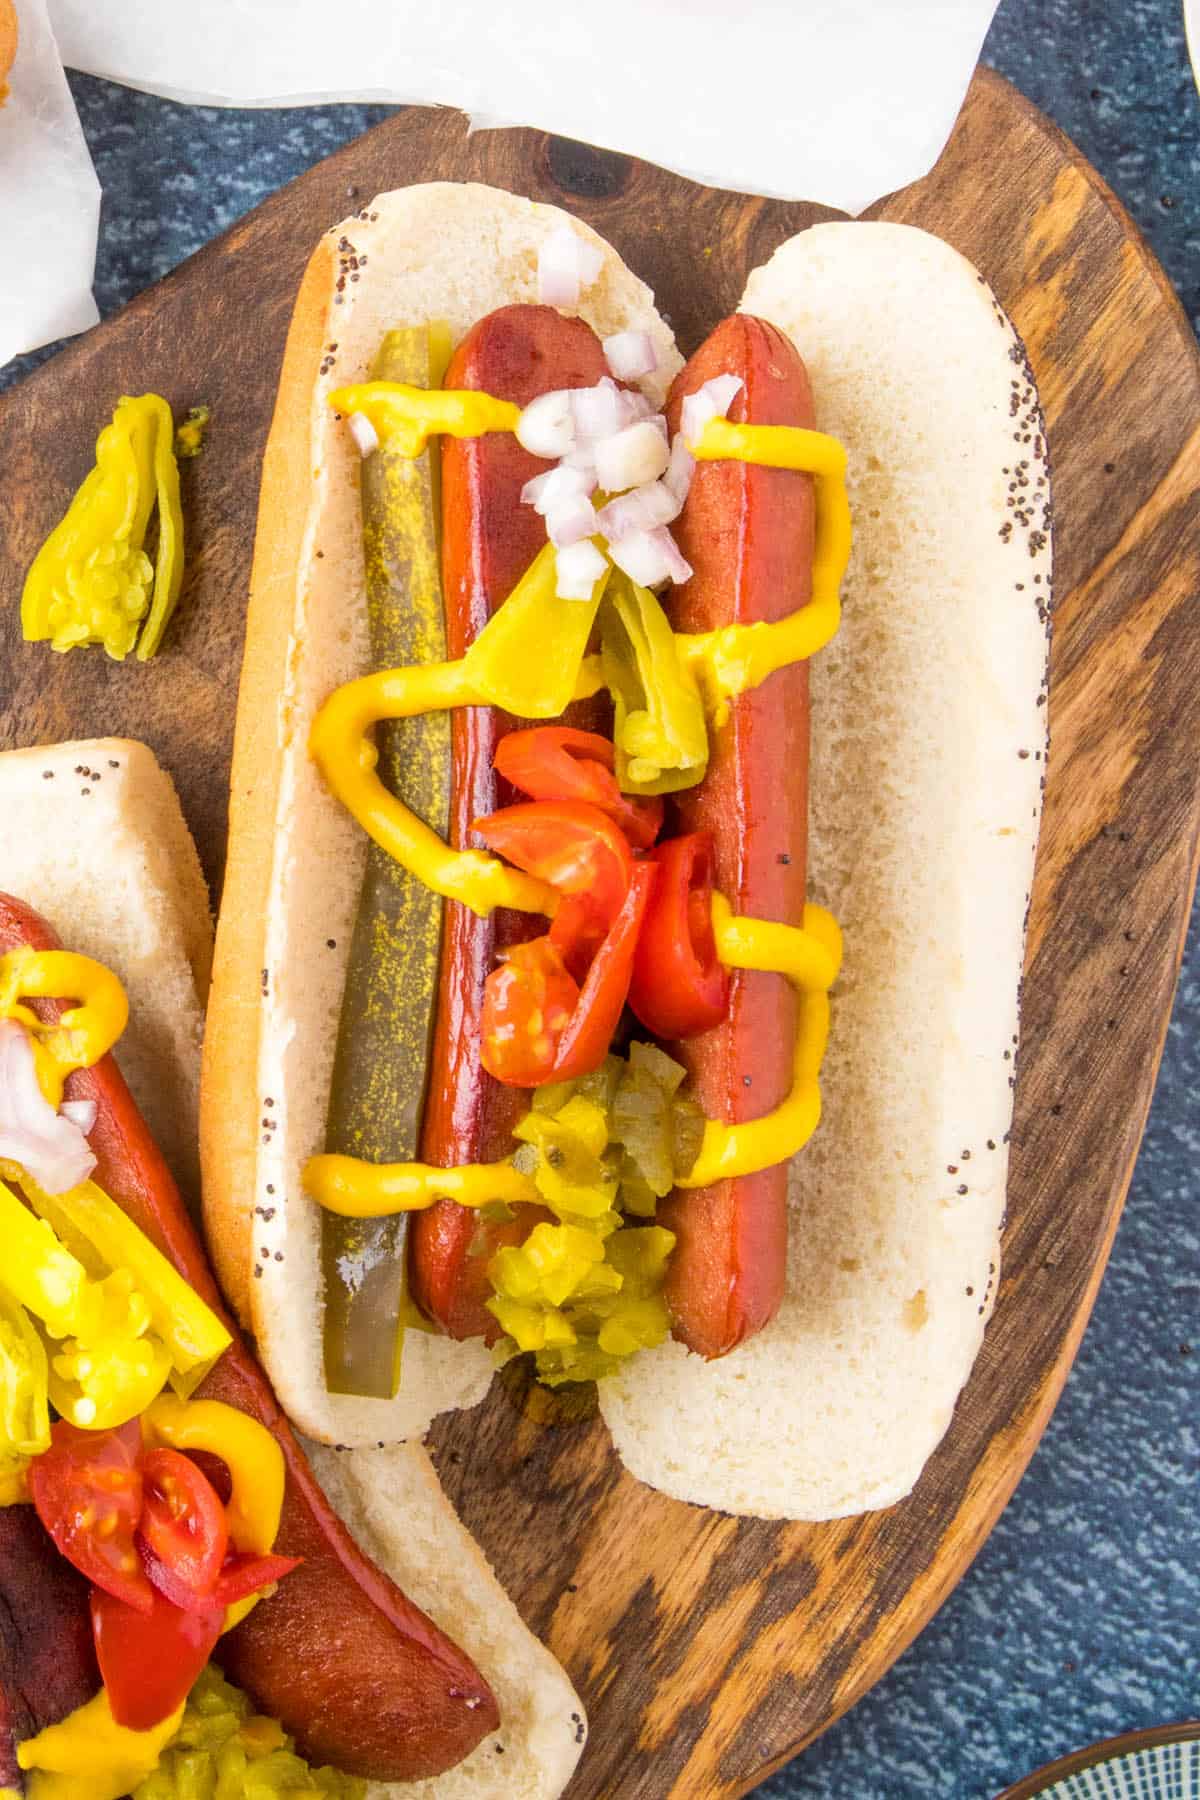 Chicago Style Hot Dogs, ready to eat